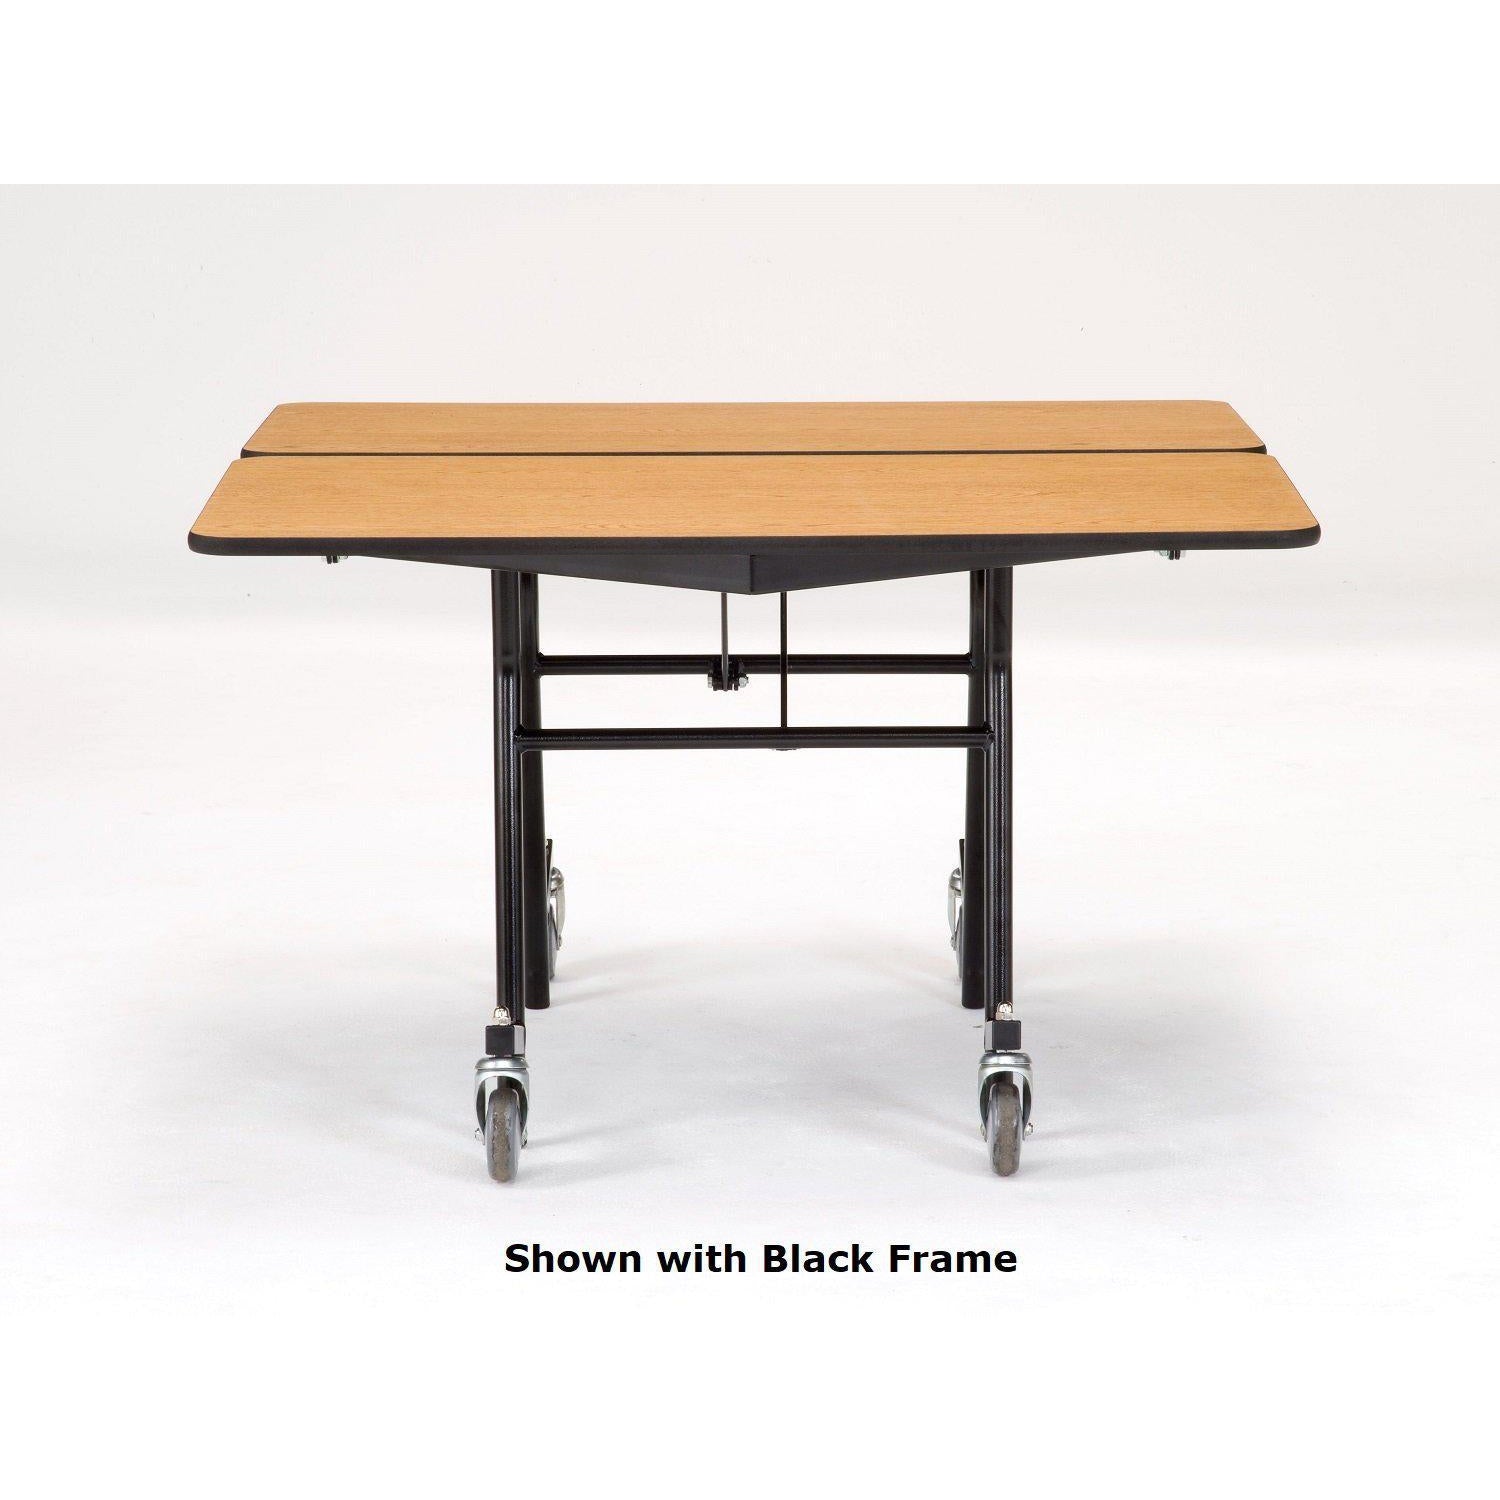 Mobile Shape Cafeteria Table, 48" Square, Particleboard Core, Vinyl T-Mold Edge, Textured Black Frame